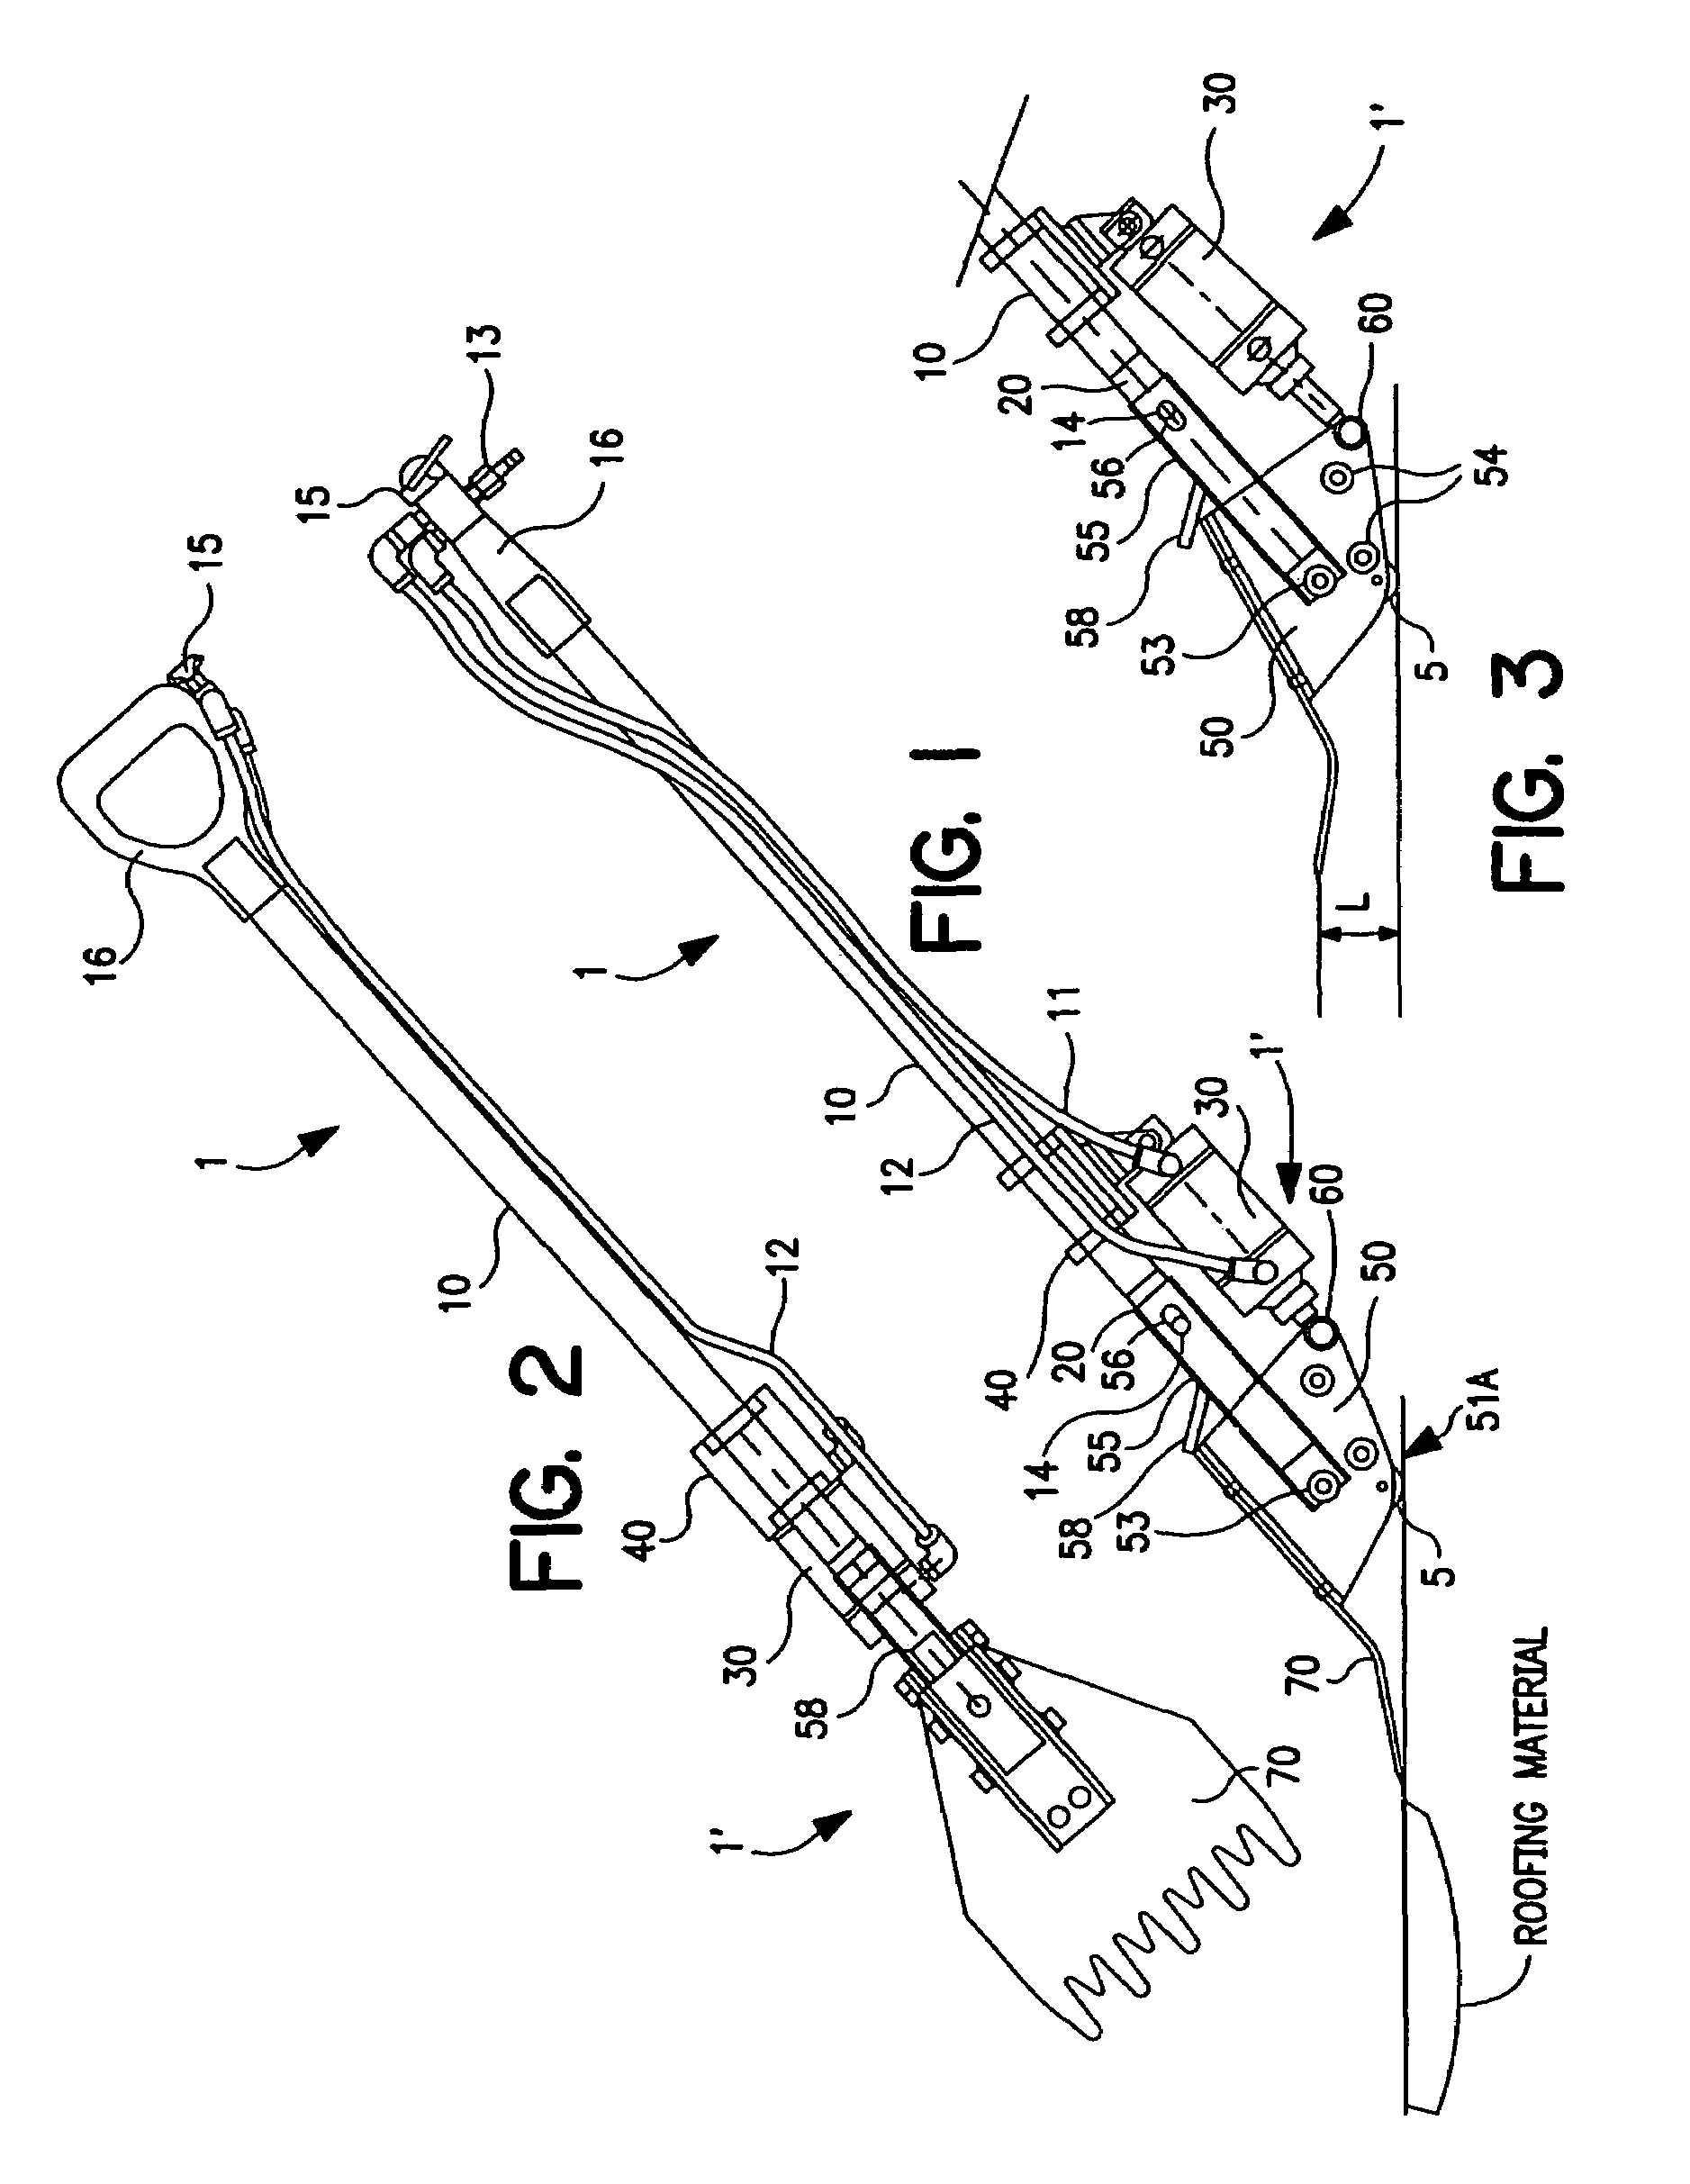 Apparatus for removing surface coverings and methods for using such apparatus